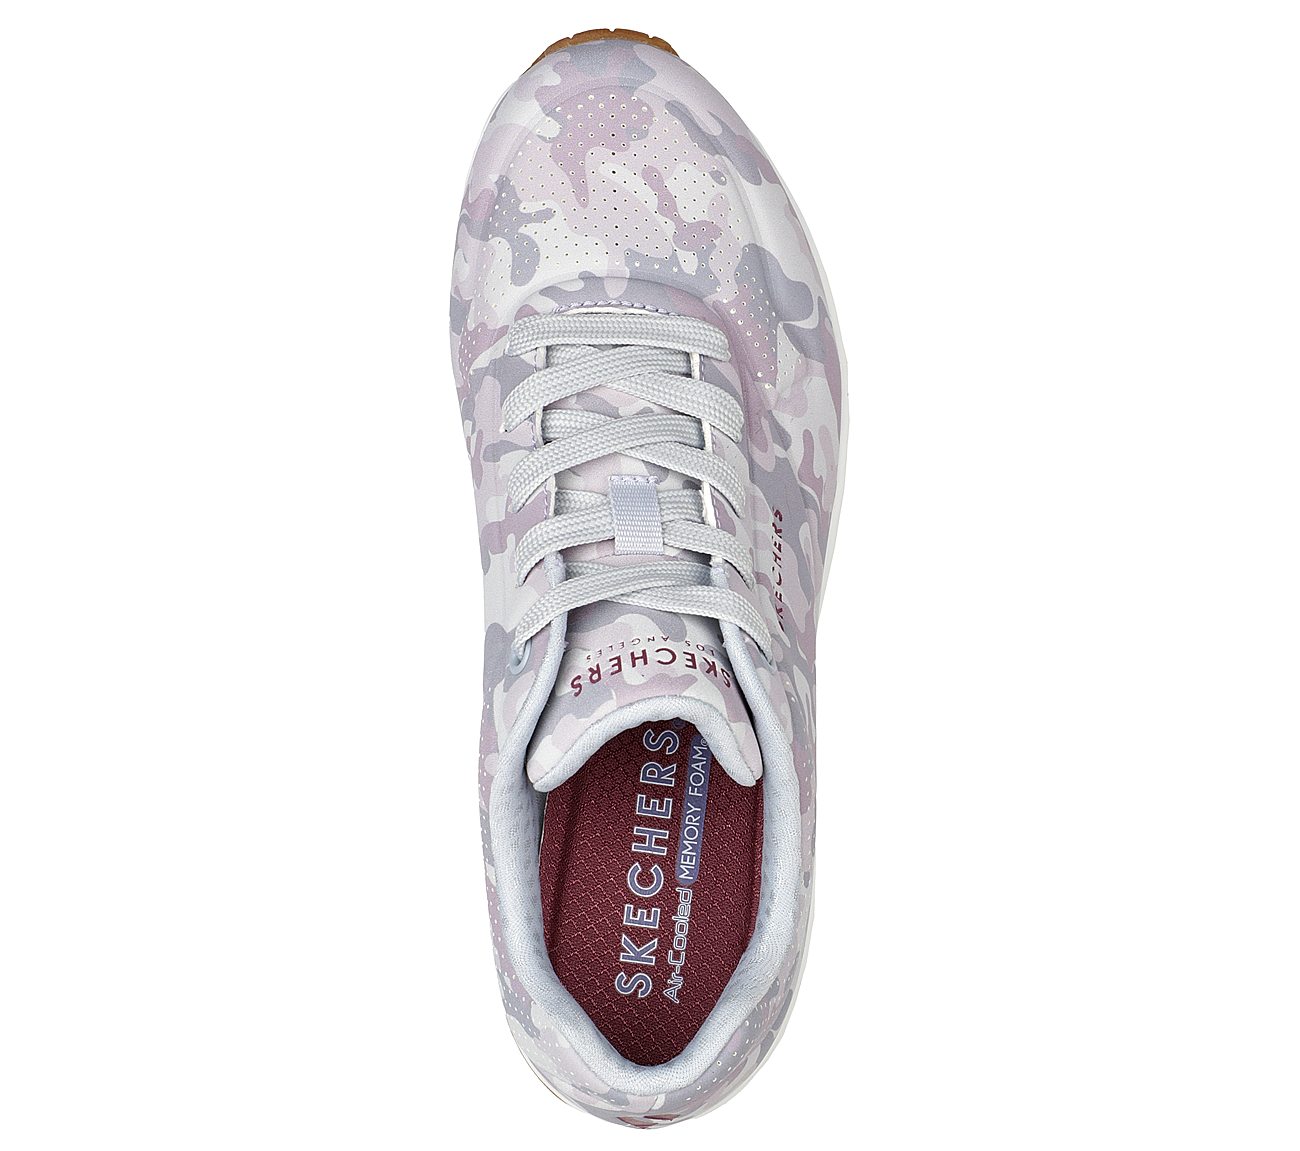 UNO-IN CAMO NEATO, CAMOUFLAGE Footwear Top View